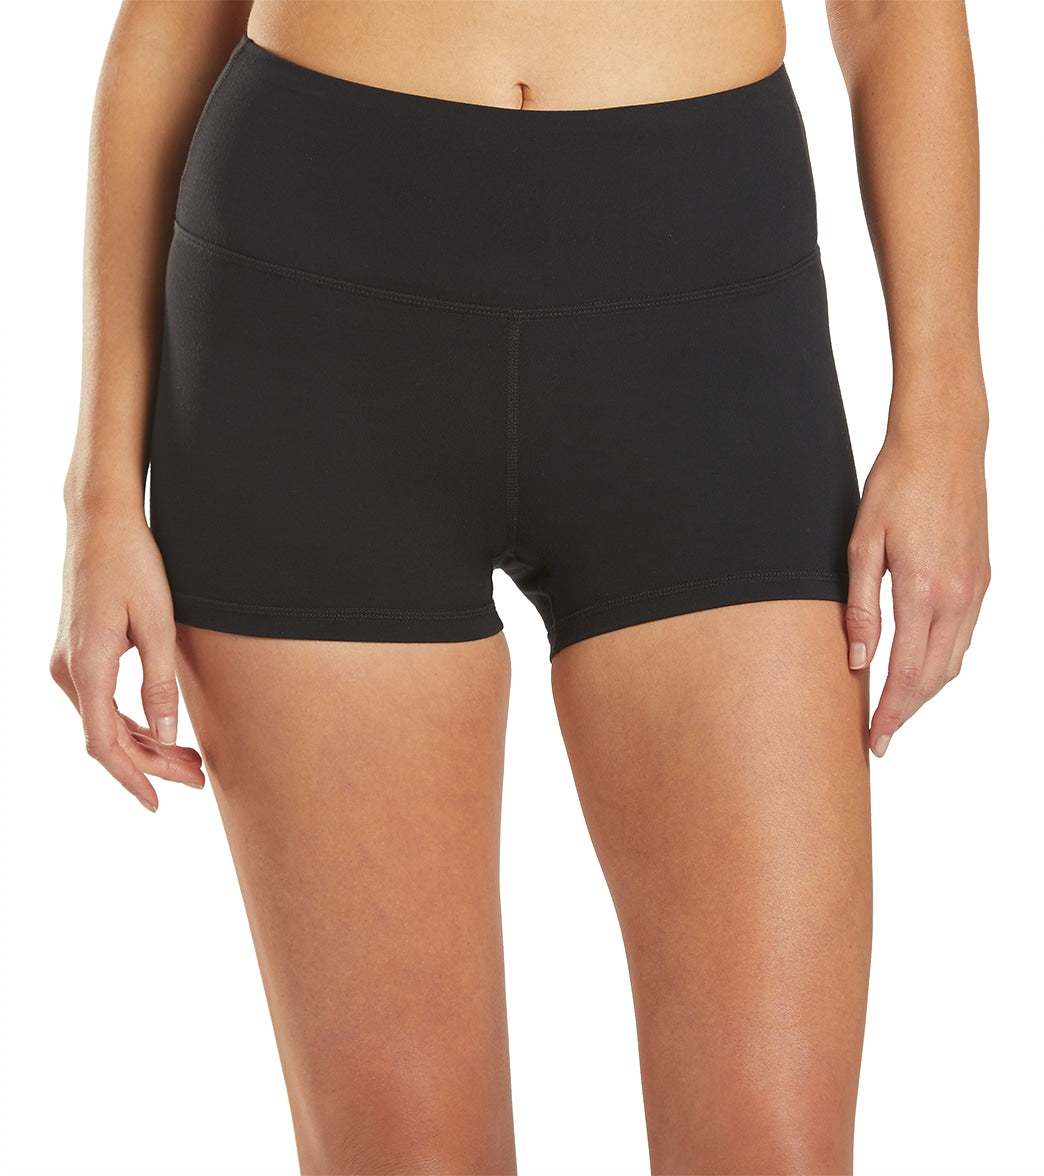 prAna Layna Shorts - Women's, Small, Black Camo, — Womens Clothing Size:  Small, Short Style: Shorts, Apparel Fit: Standard, Age Group: Adults —  1966021-002-S